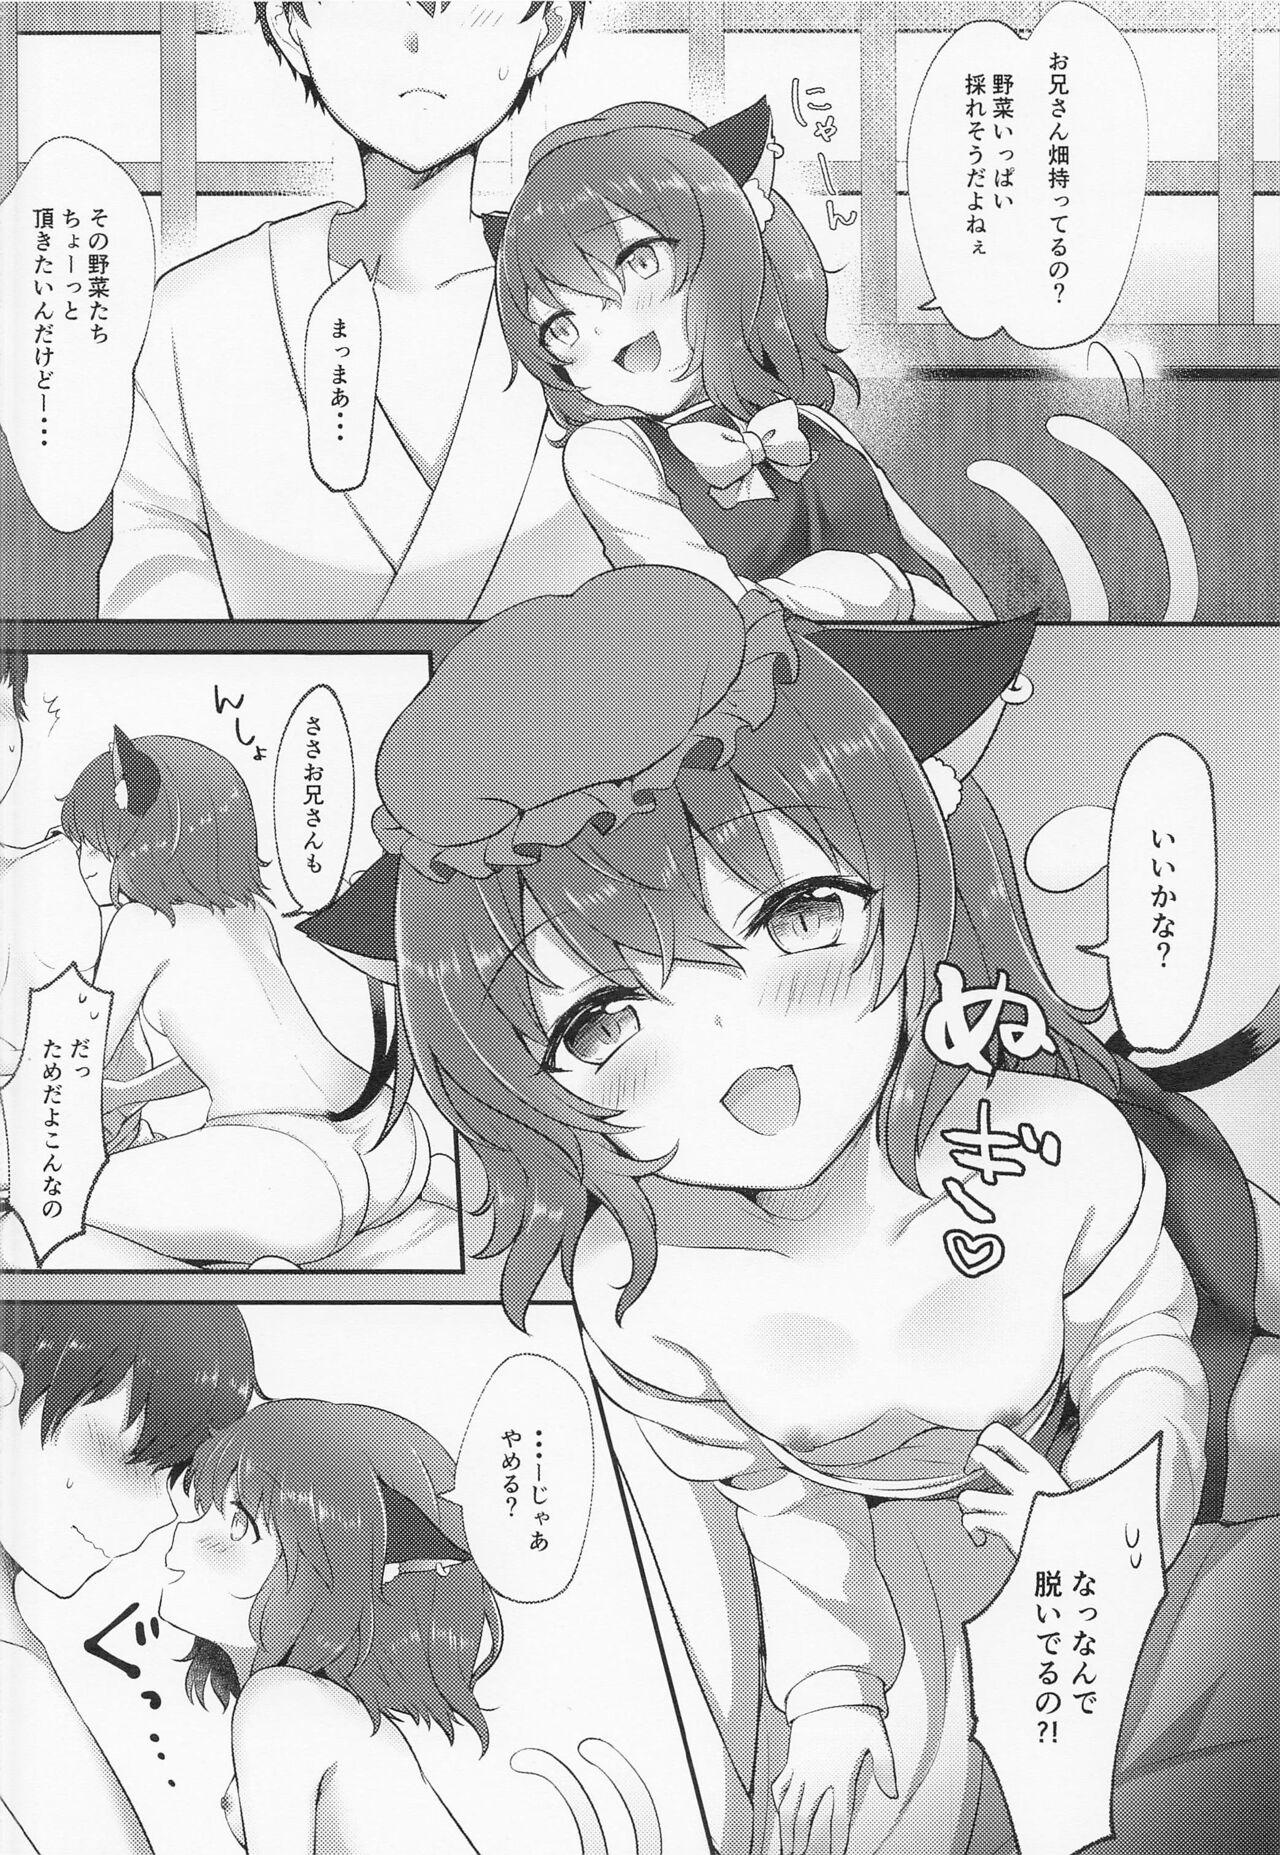 Tats Repeat the Night 3 - Touhou project Free Blowjobs - Page 7